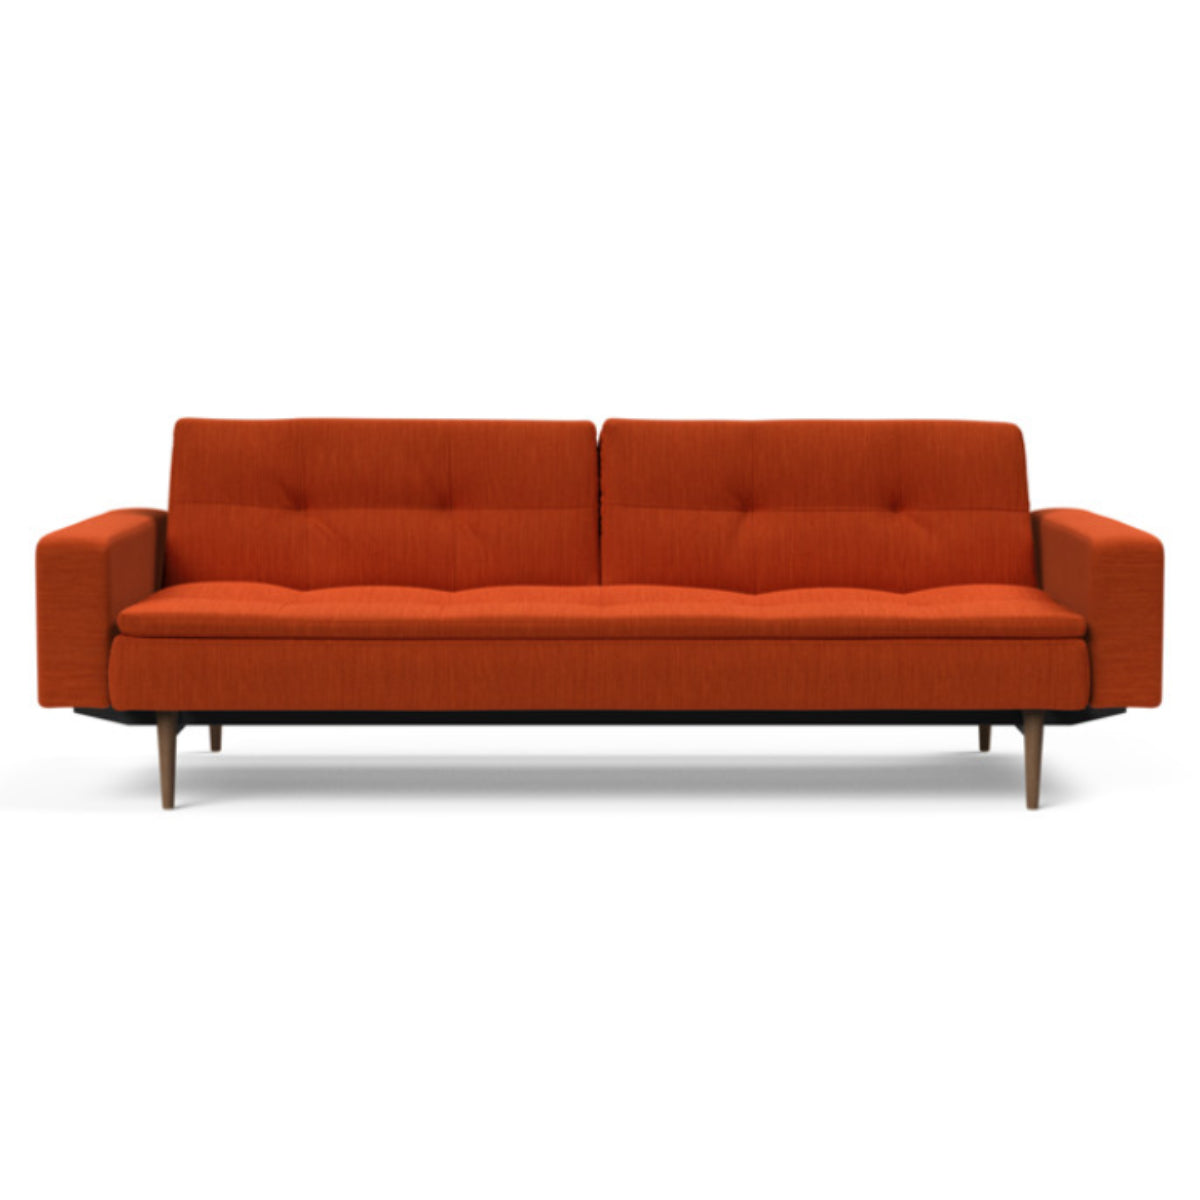 Dublexo Styletto Sofa Bed Dark Wood With Arms Daybed INNOVATION     Four Hands, Burke Decor, Mid Century Modern Furniture, Old Bones Furniture Company, Old Bones Co, Modern Mid Century, Designer Furniture, https://www.oldbonesco.com/